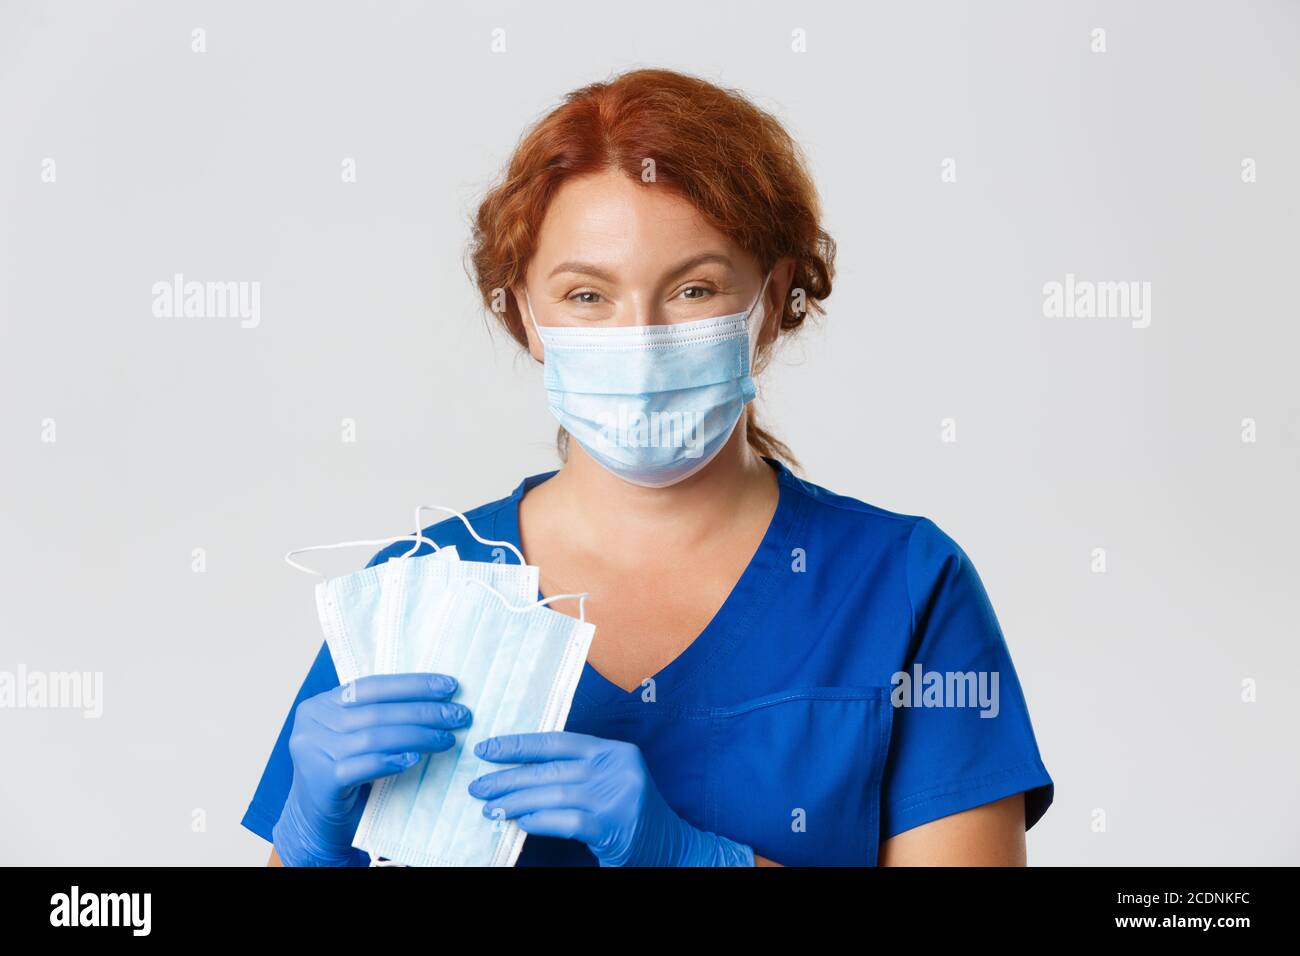 Medical workers, covid-19 pandemic, coronavirus concept. Close-up of smiling caring female nurse, doctor in rubber gloves ask to use face masks and Stock Photo